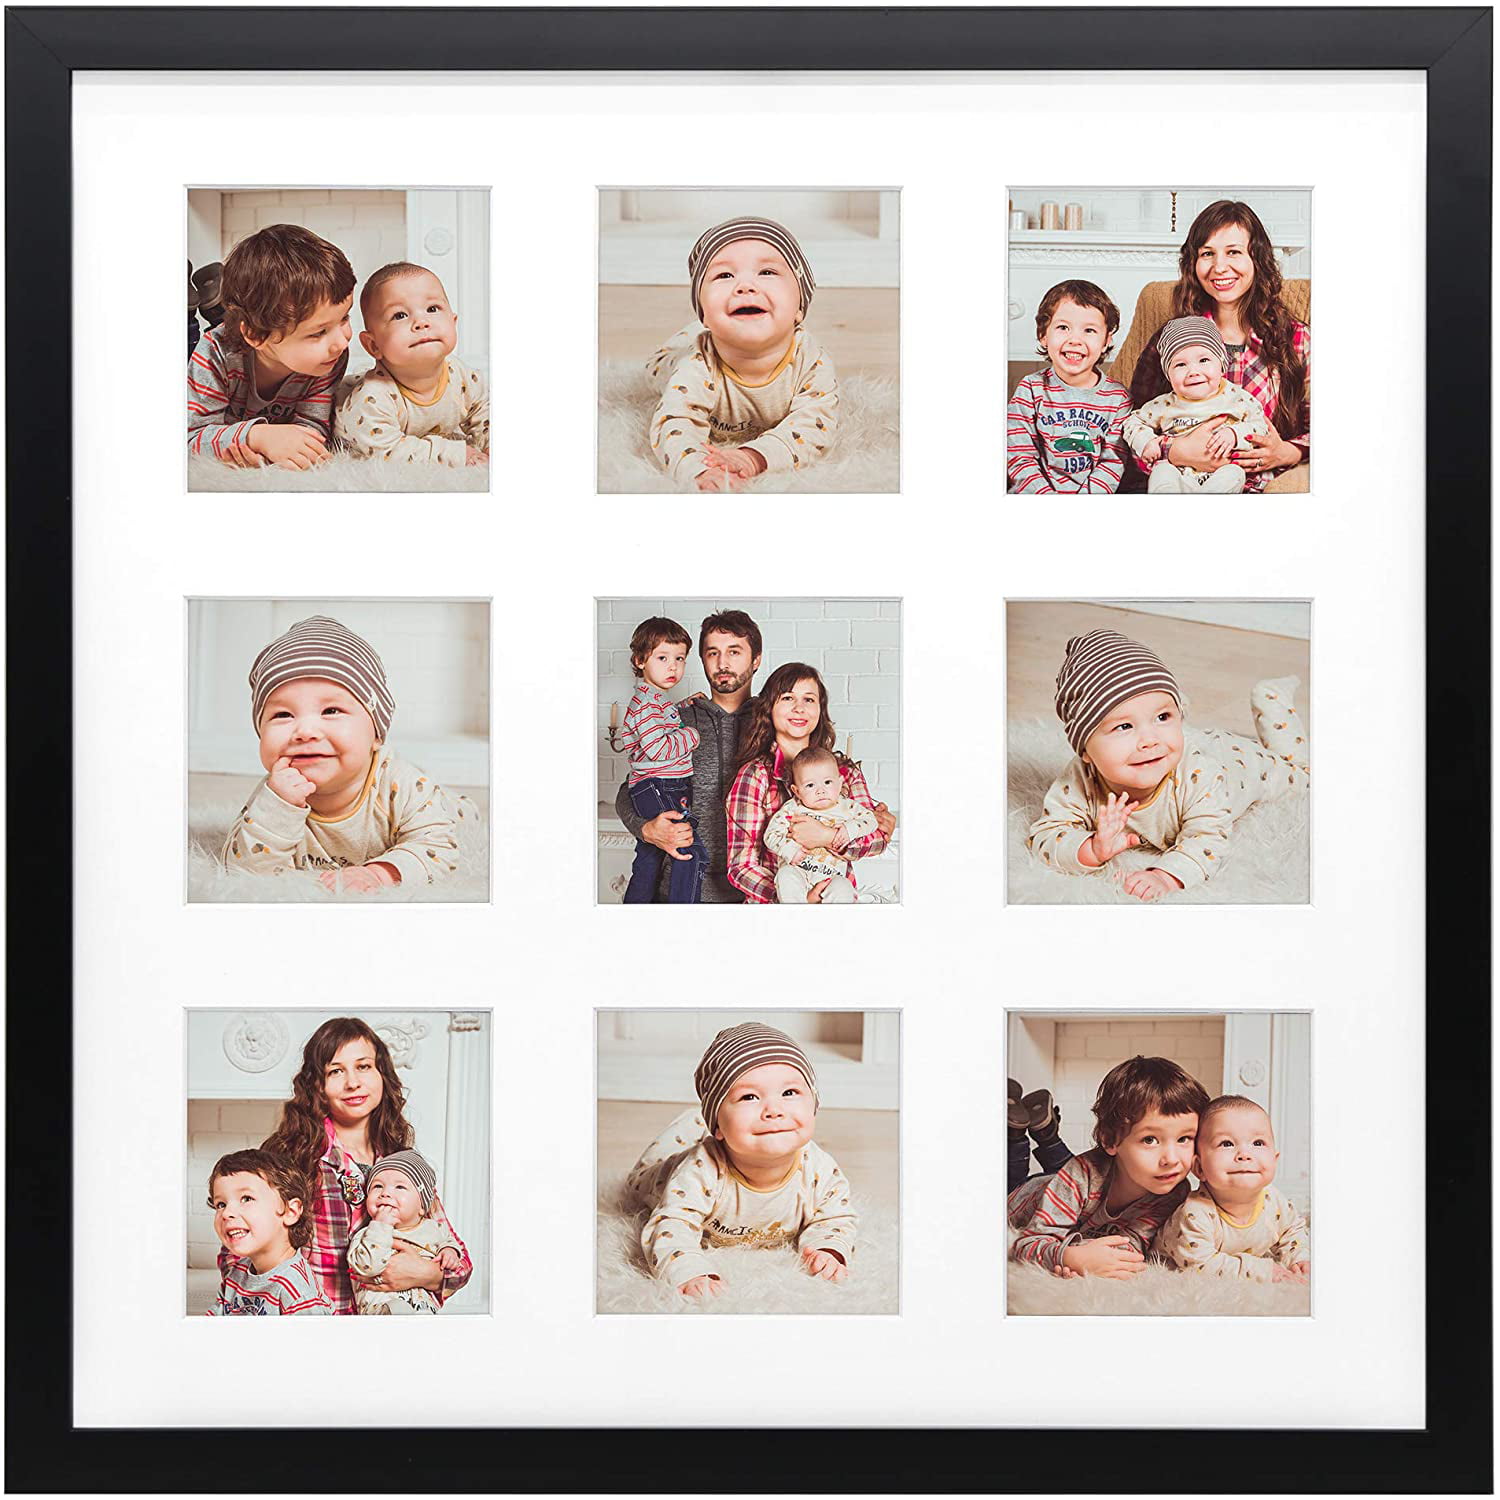 Golden State Art Smartphone Instagram Frame Collection 12x12-inch Square Photo Wood Frames with Photo Mat & Real Glass for 8x8-inch Pictures Black